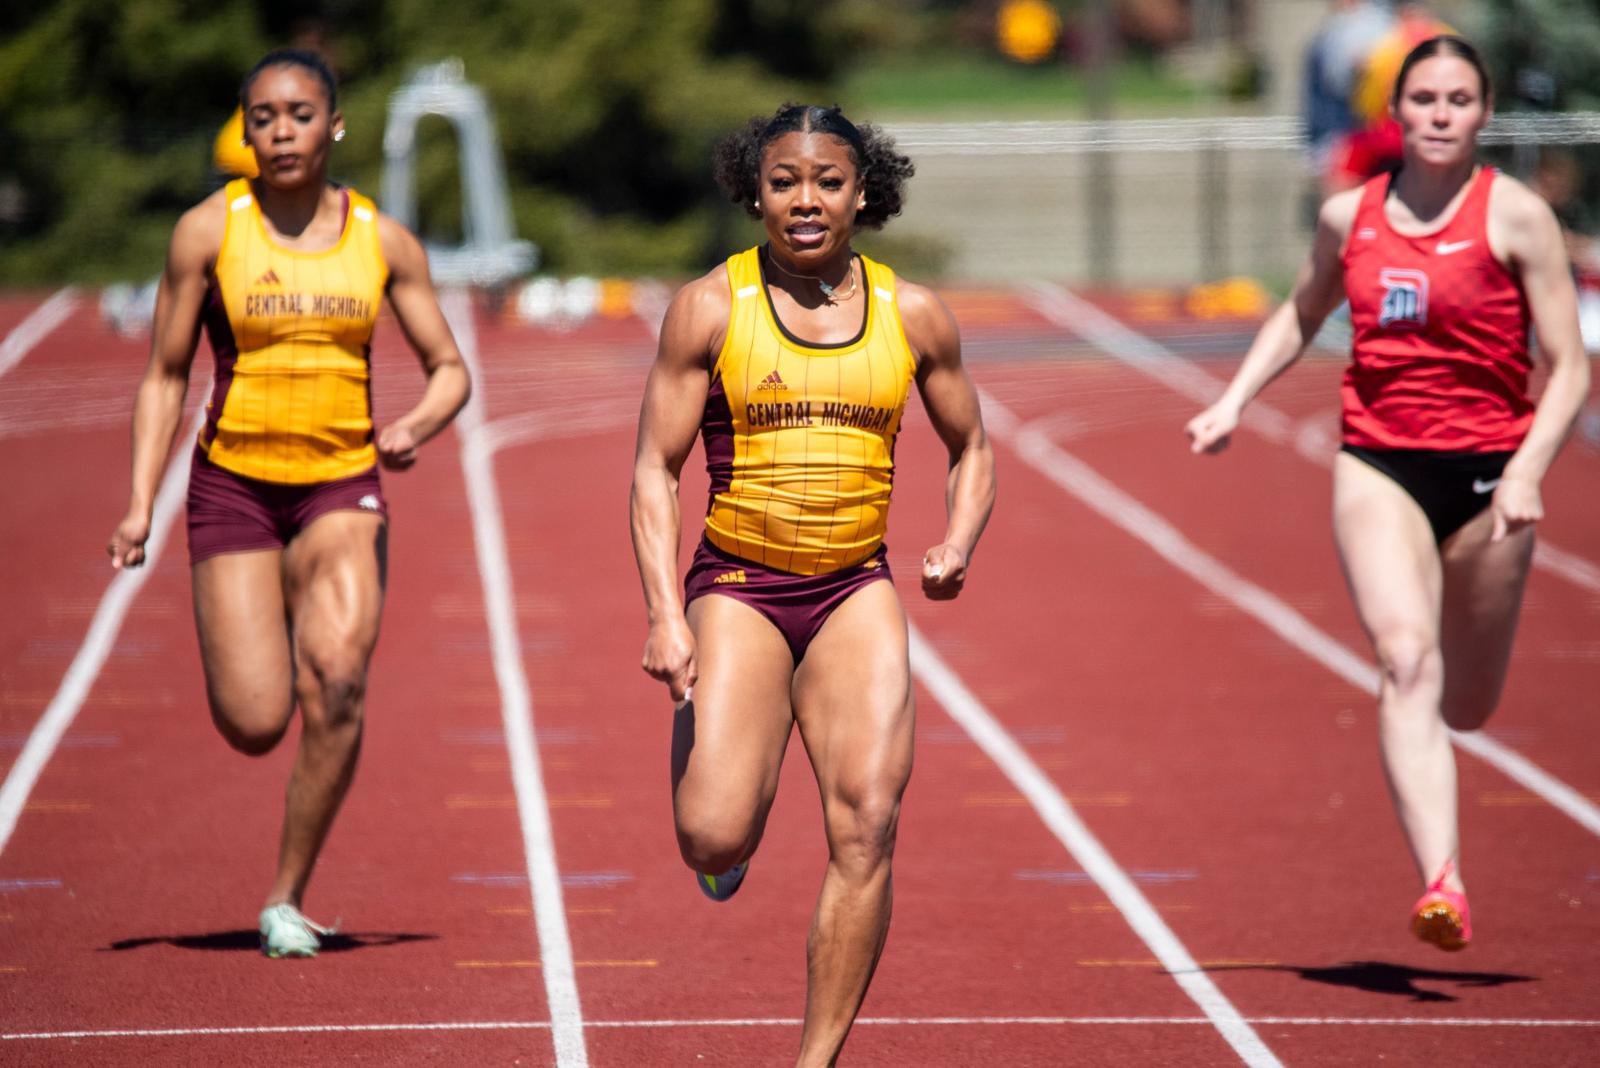 Rush Sprints to Top-10 Performance in 100m; Chippewa Track and Field Wraps up In Louisville on High Note